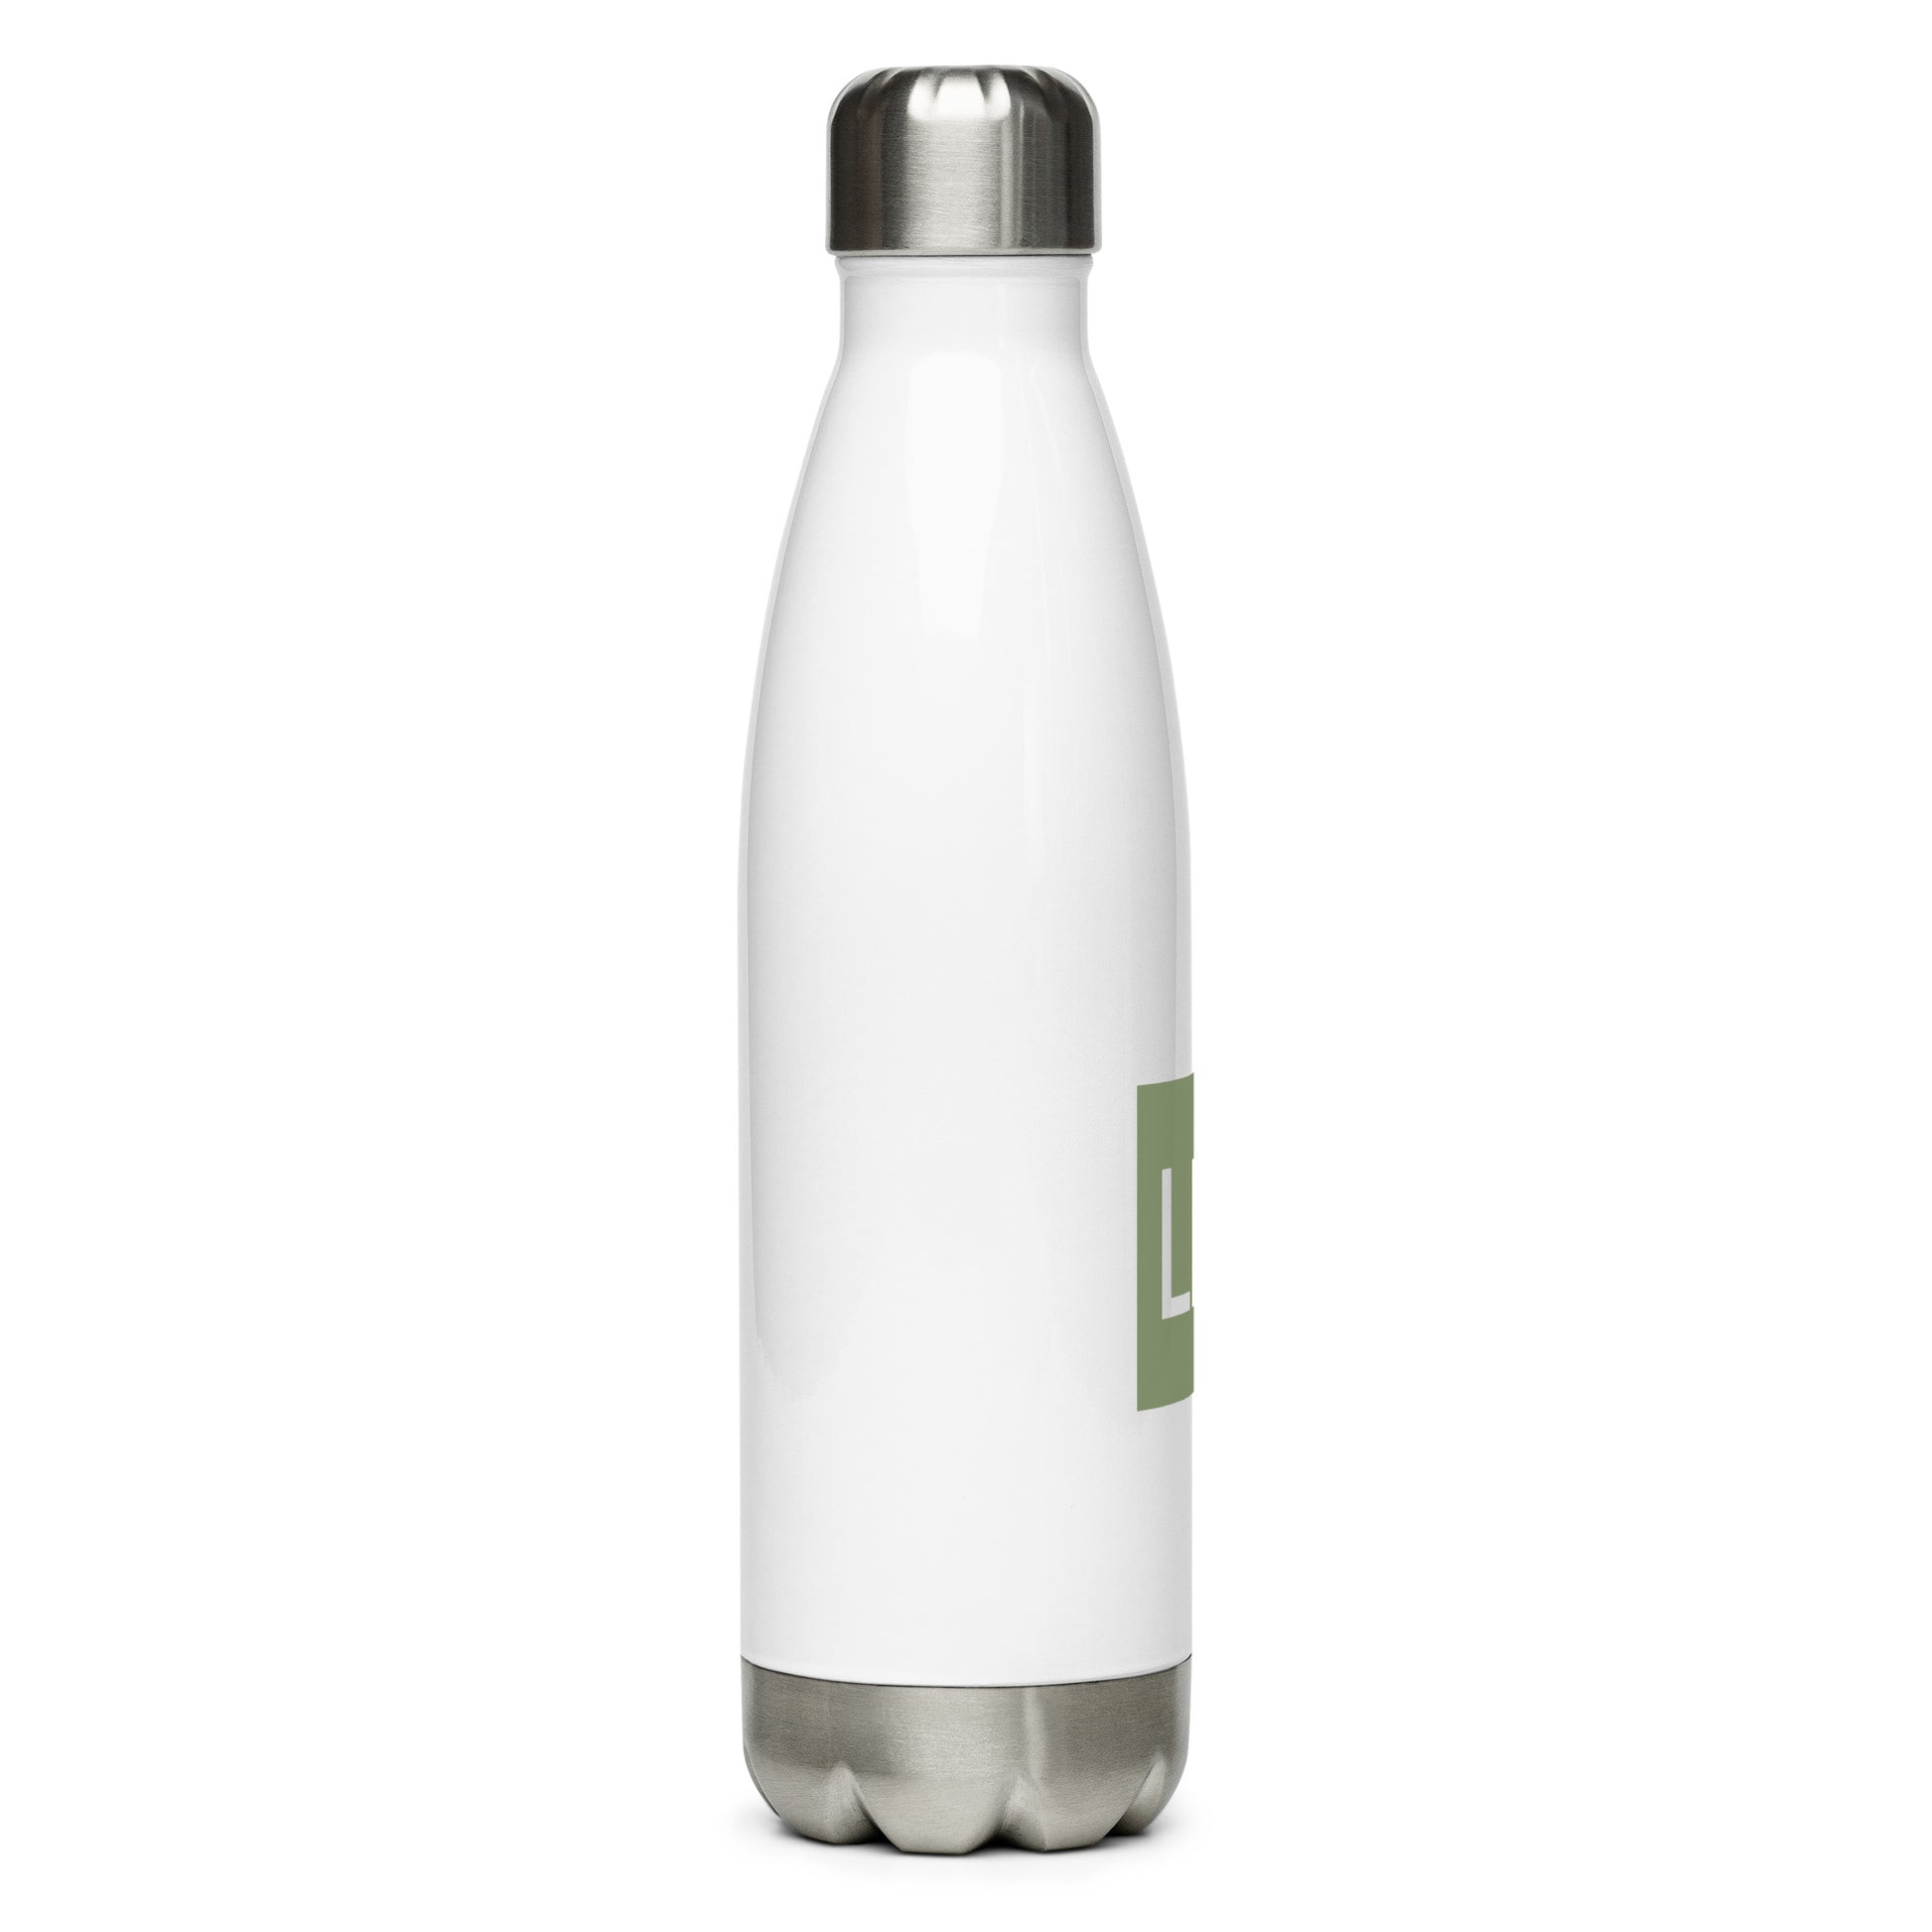 Aviation Gift Water Bottle - Camo Green • LHR London • YHM Designs - Image 07